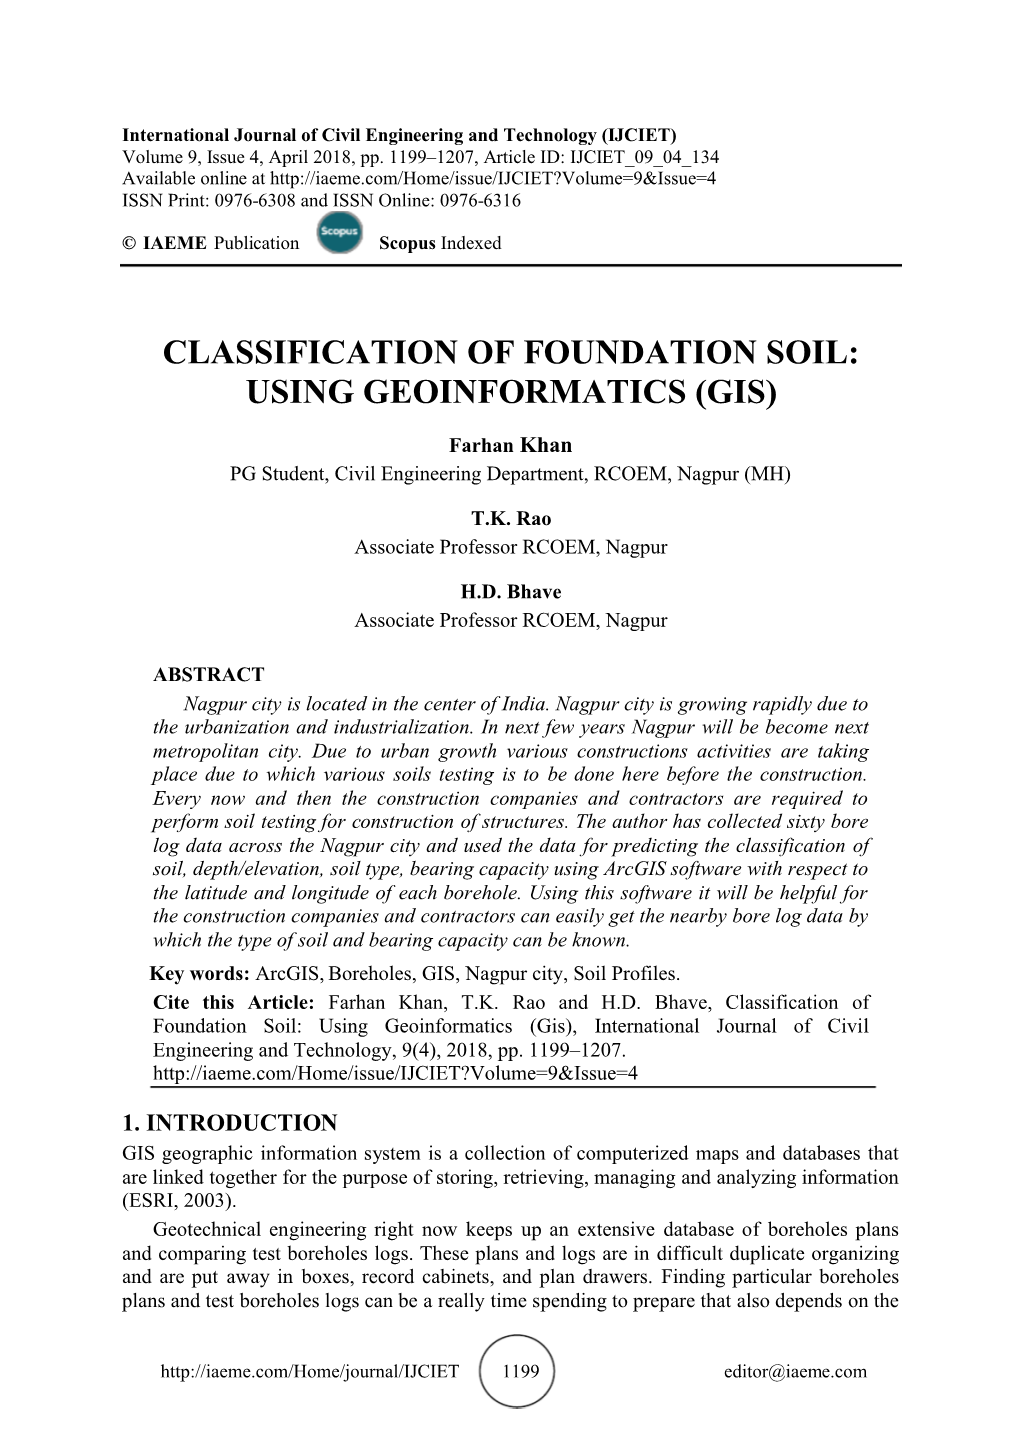 Classification of Foundation Soil: Using Geoinformatics (Gis)